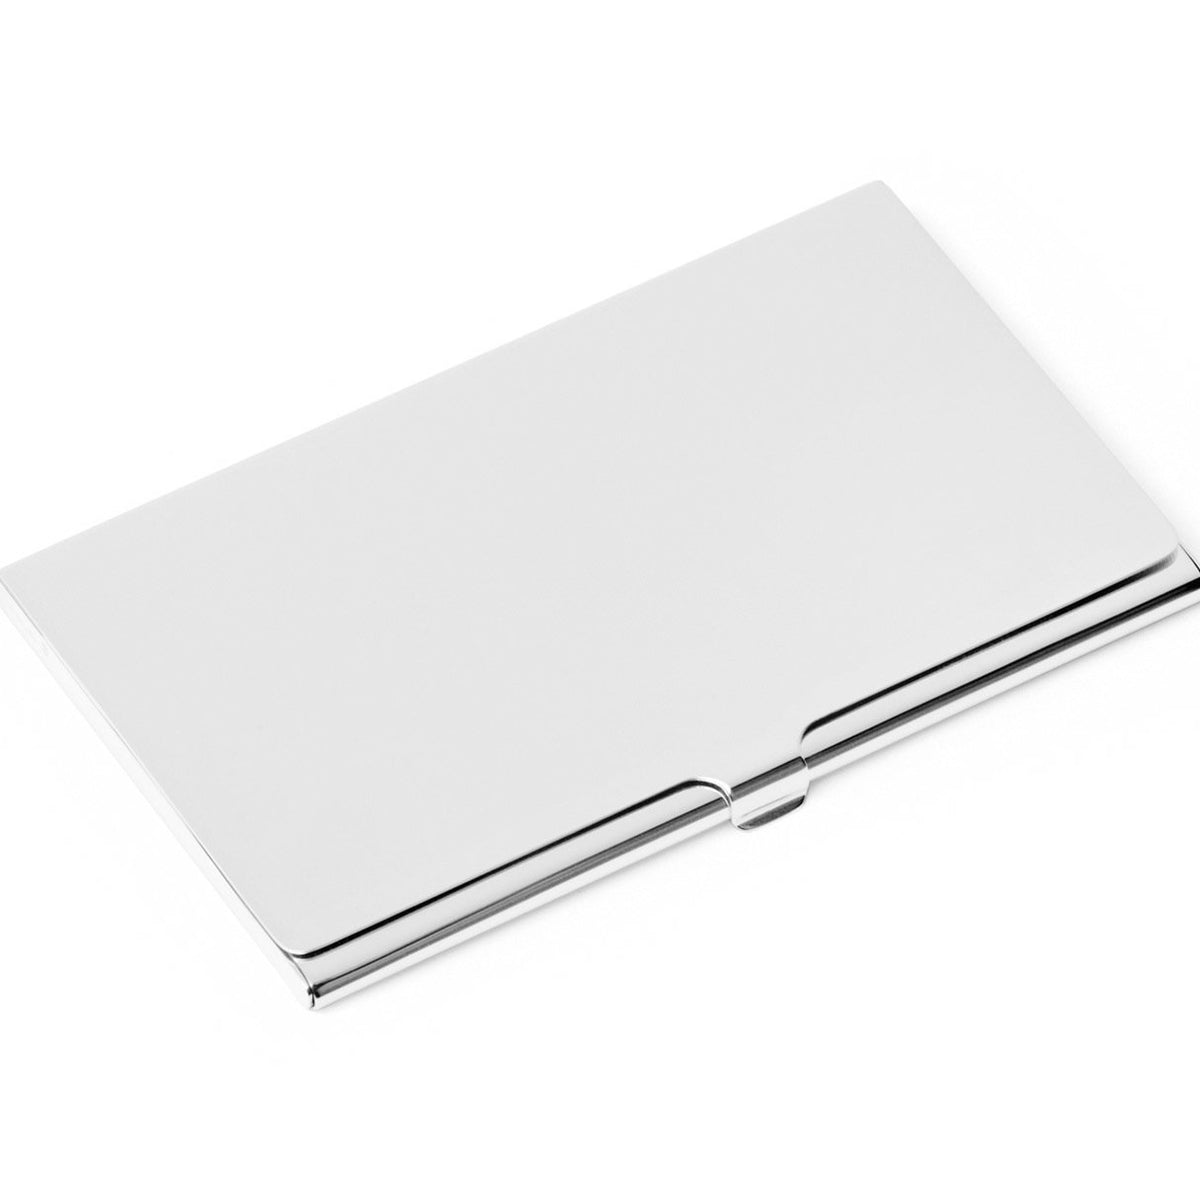  Bey-Berk D261N Silver Business Card Case with Gold